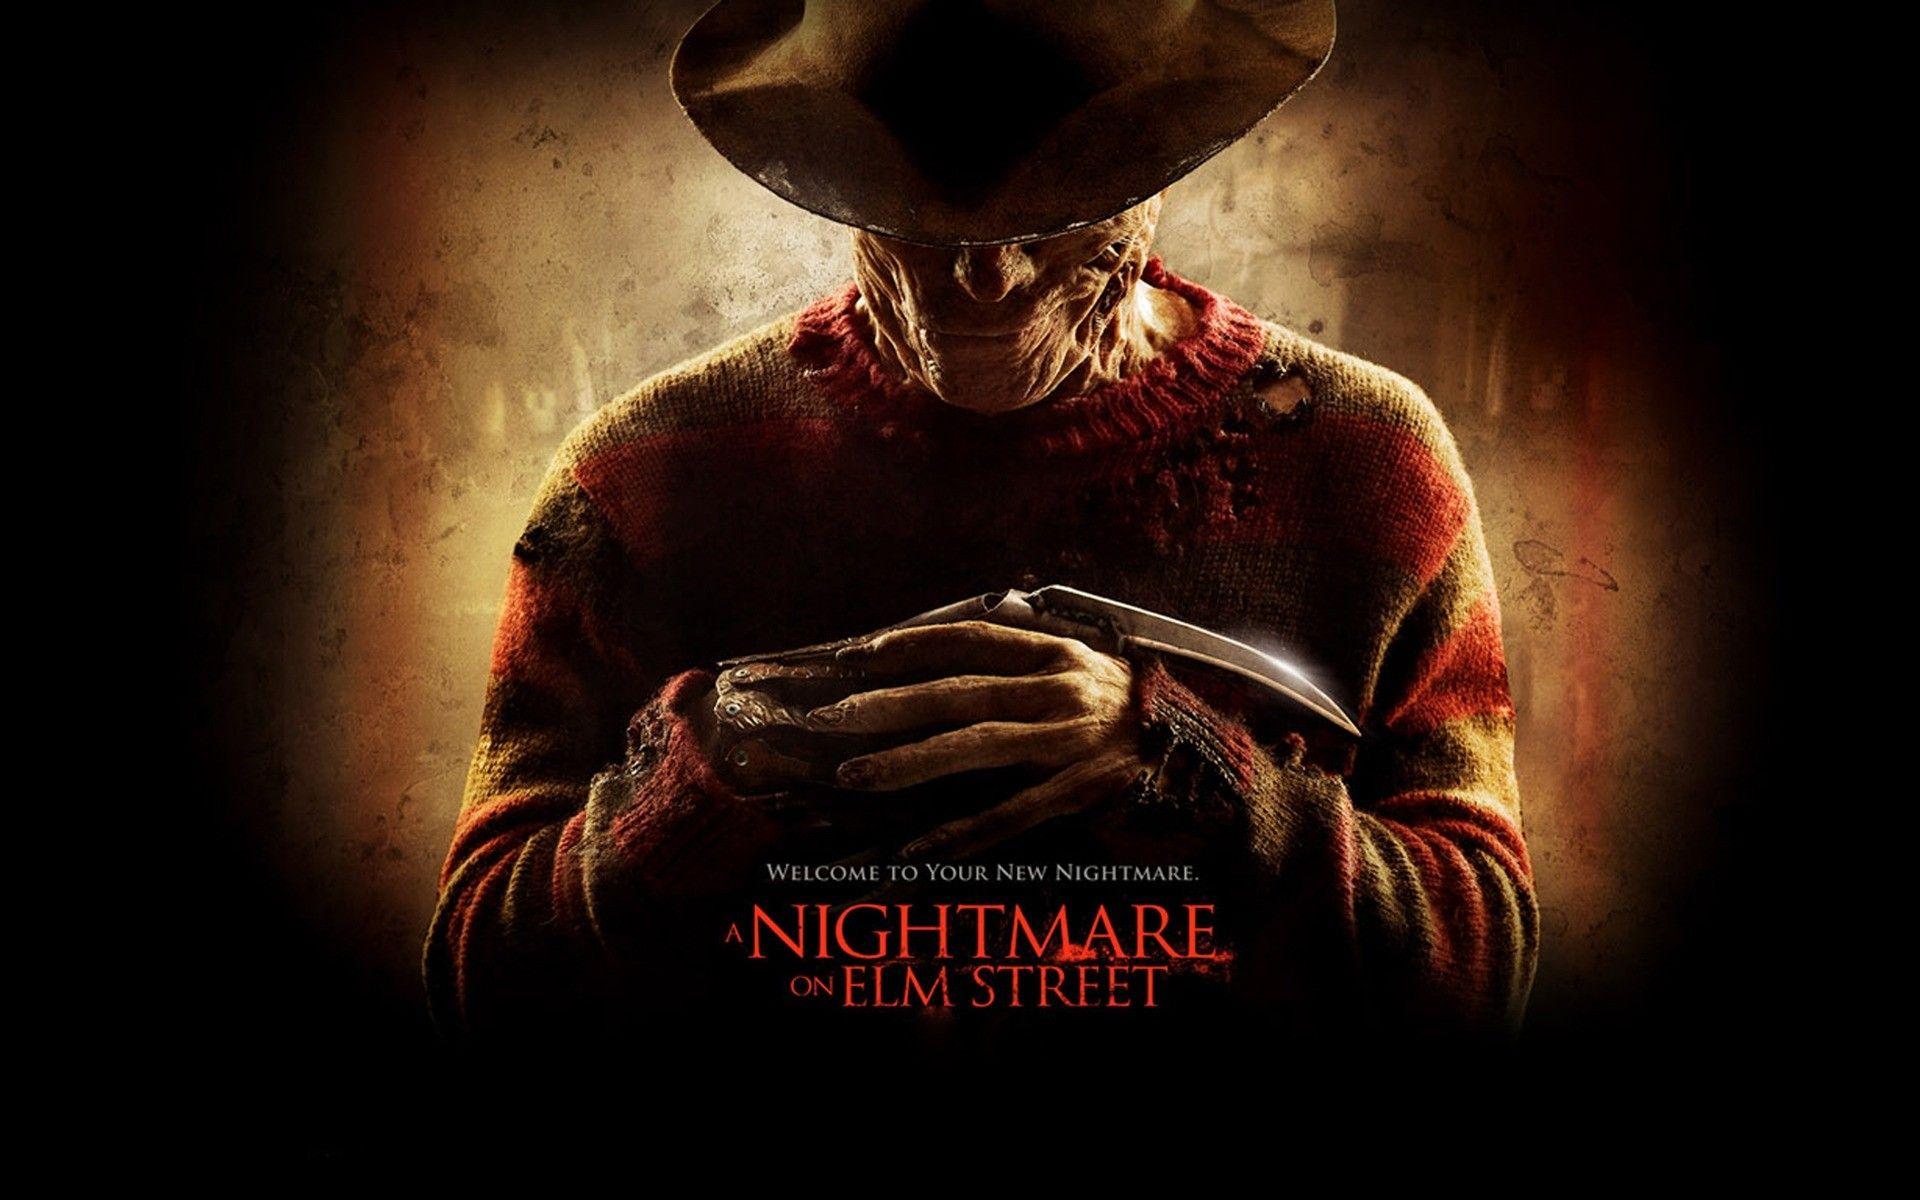 A Nightmare on Elm Street. Android wallpaper for free